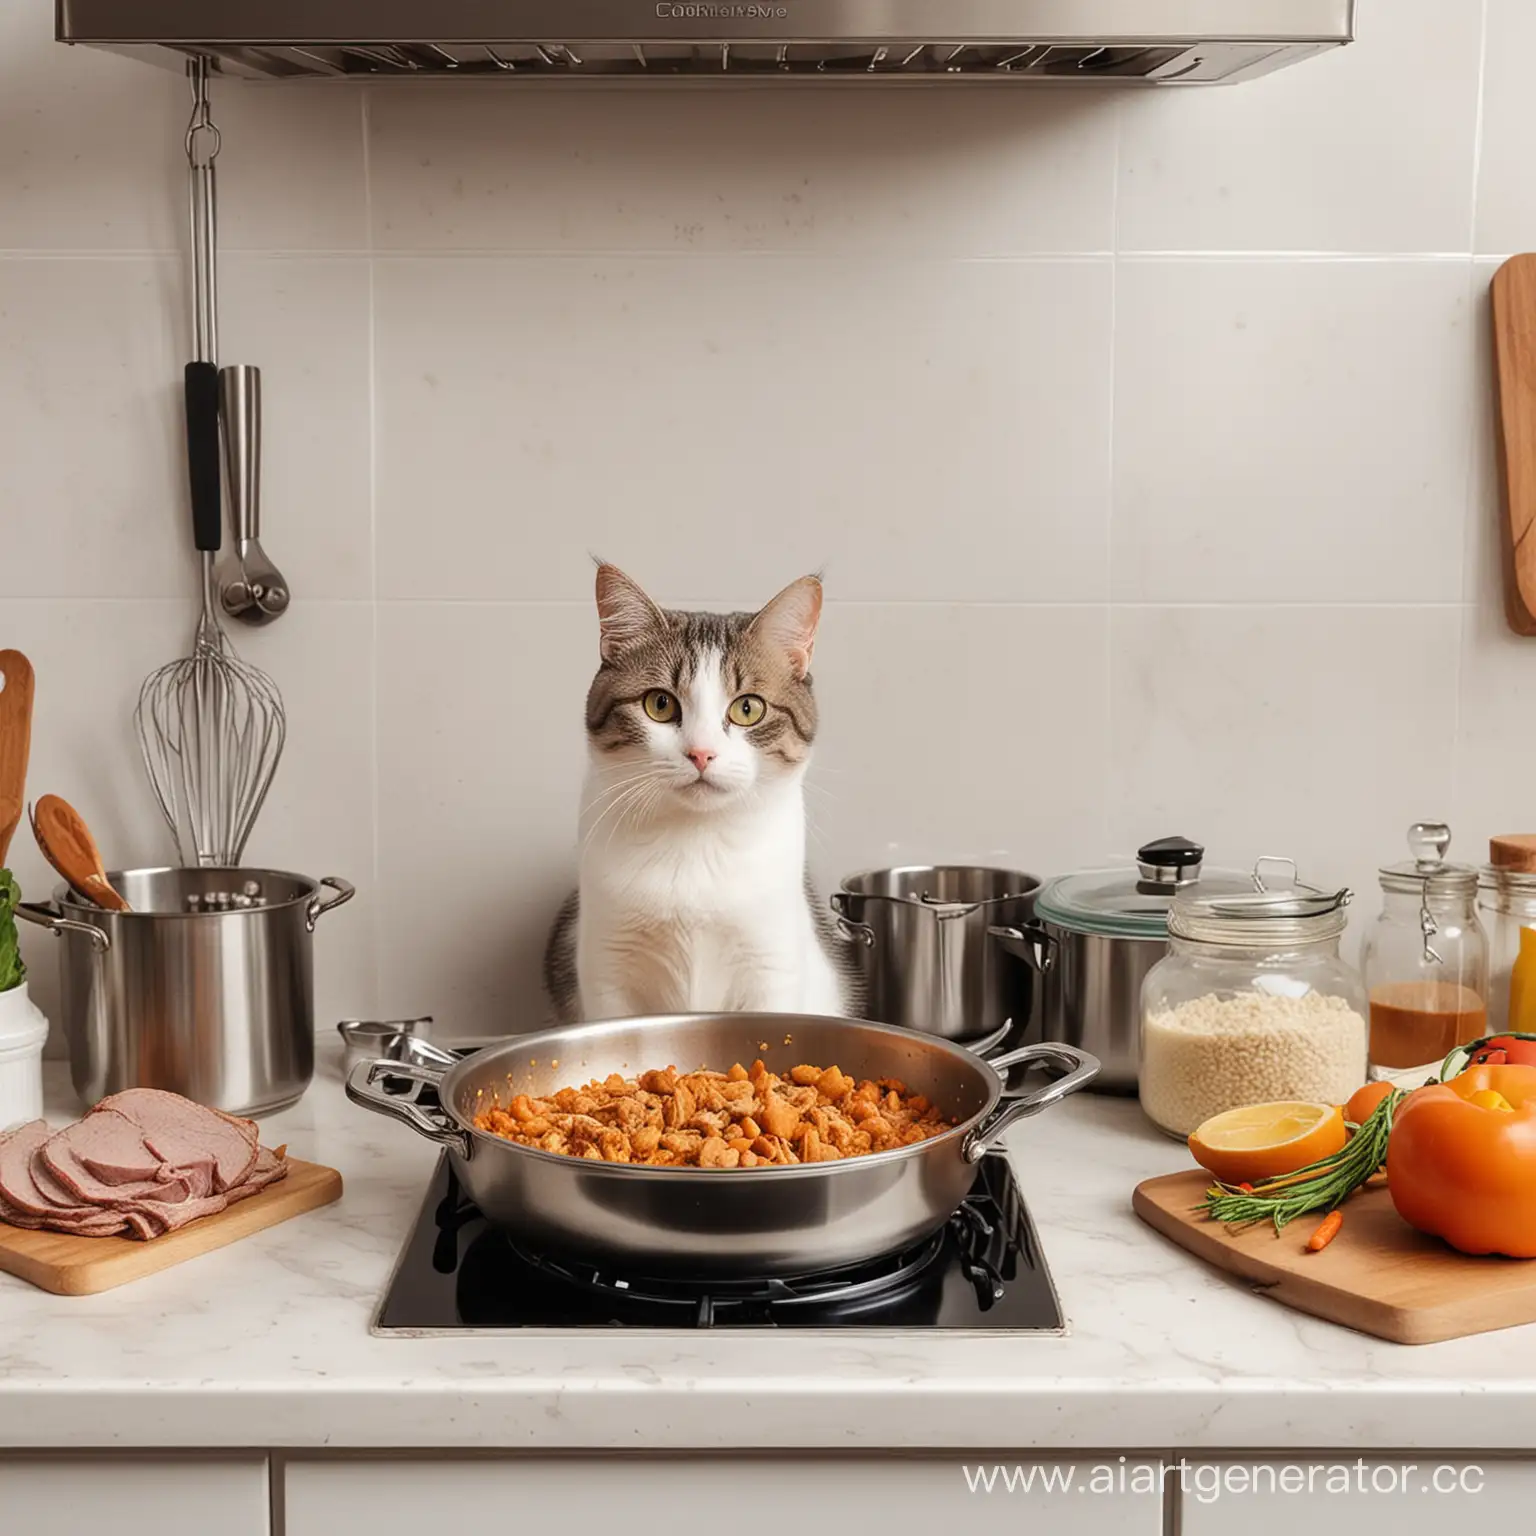 Adorable-Cat-Cooking-in-a-Vibrant-Kitchen-Scene